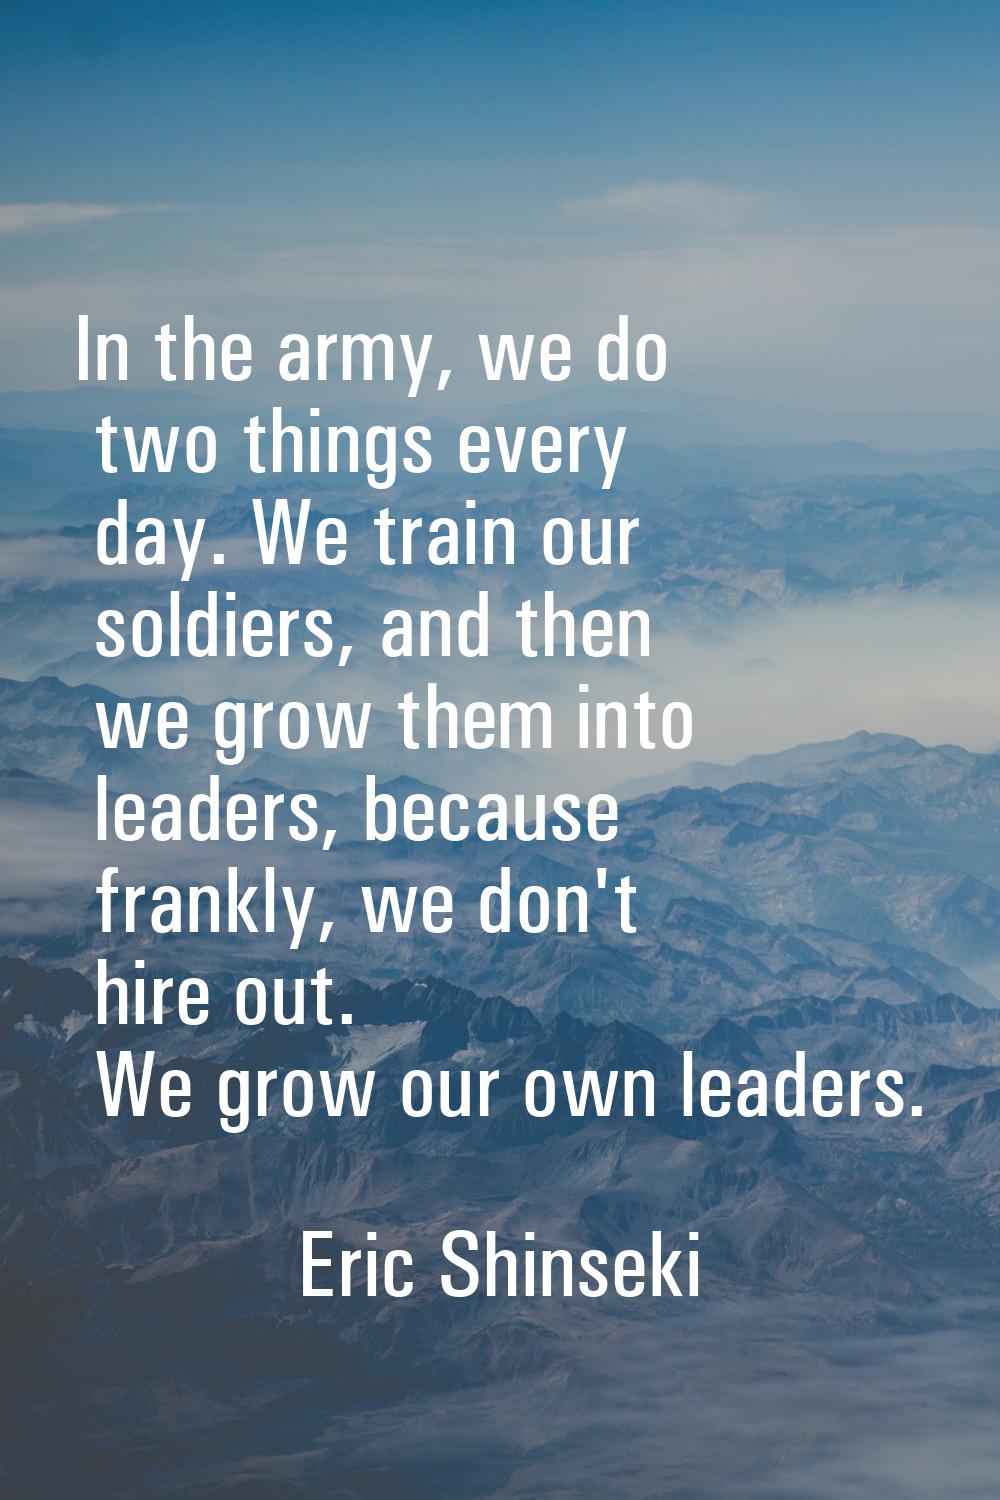 In the army, we do two things every day. We train our soldiers, and then we grow them into leaders,